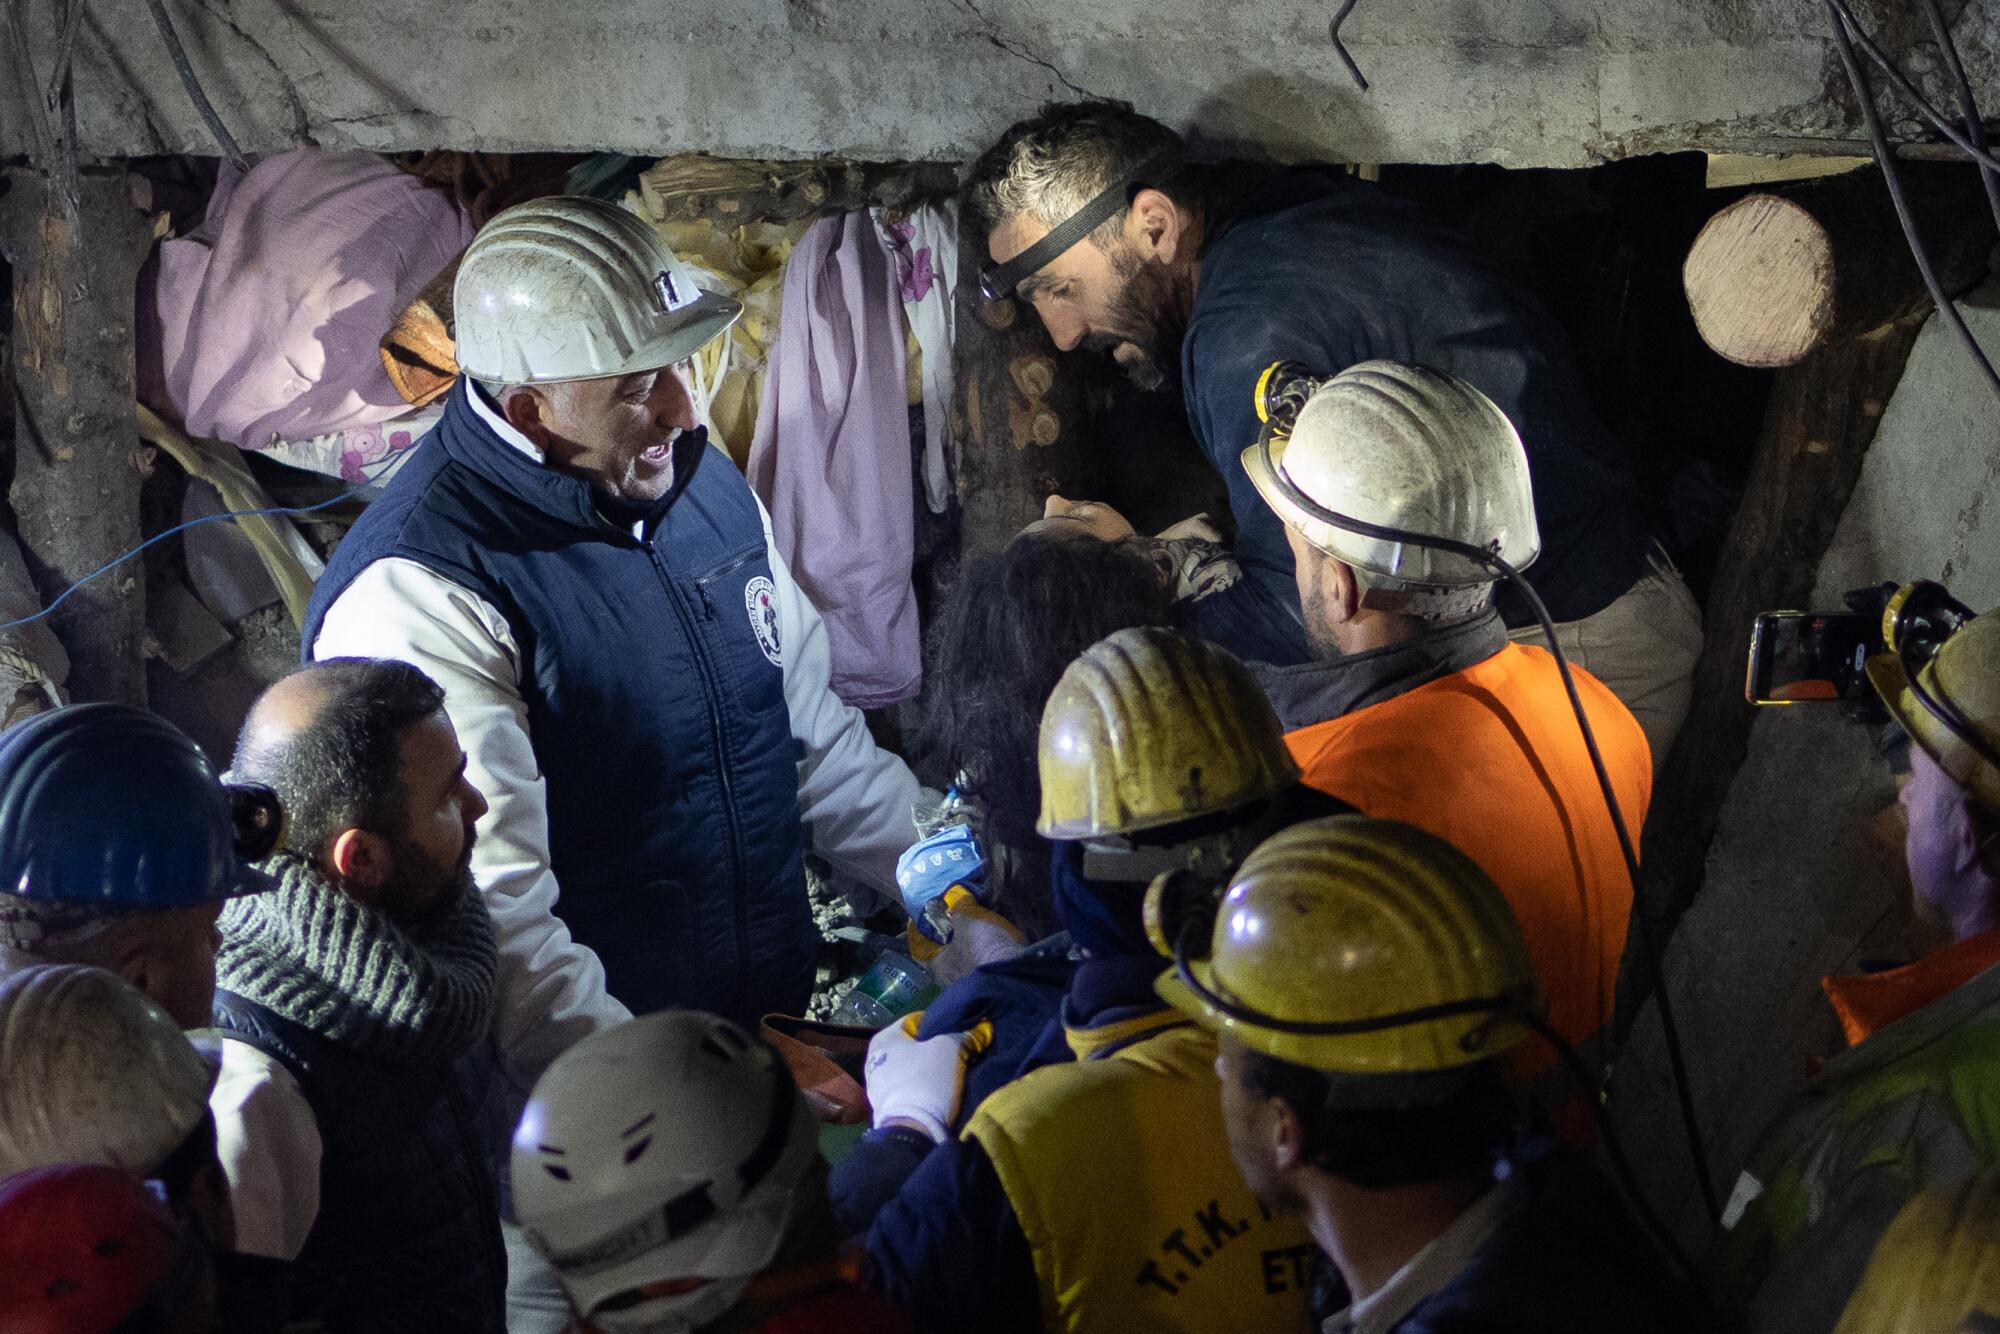 People in hard hats and head lamps work amid rubble at night.